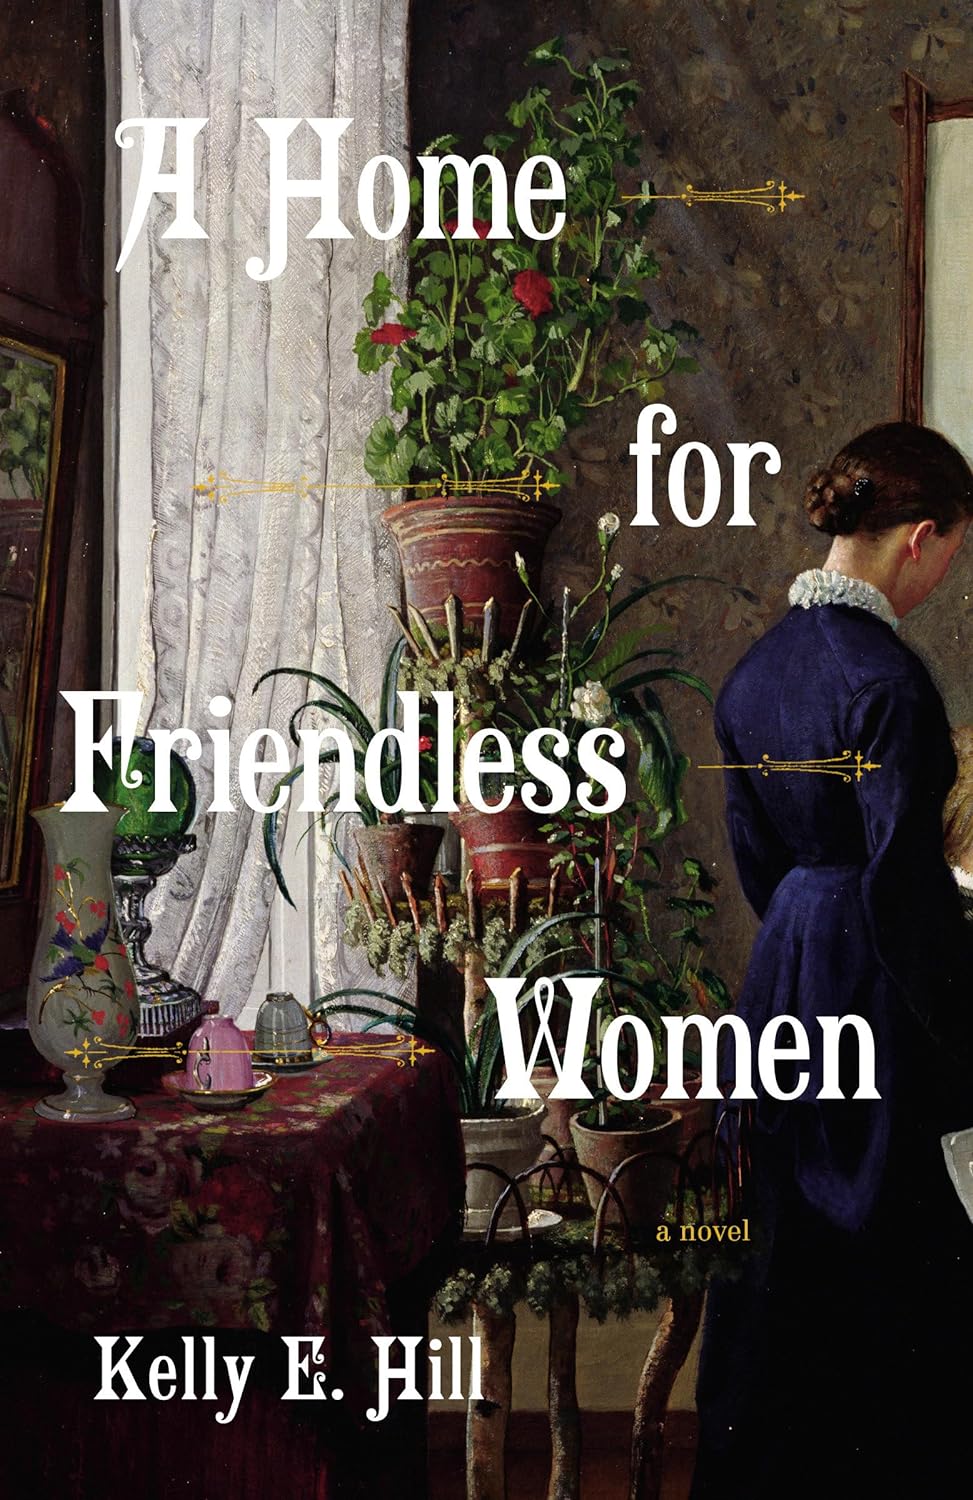 A Home for Friendless Women by Kelly E. Hill book cover.